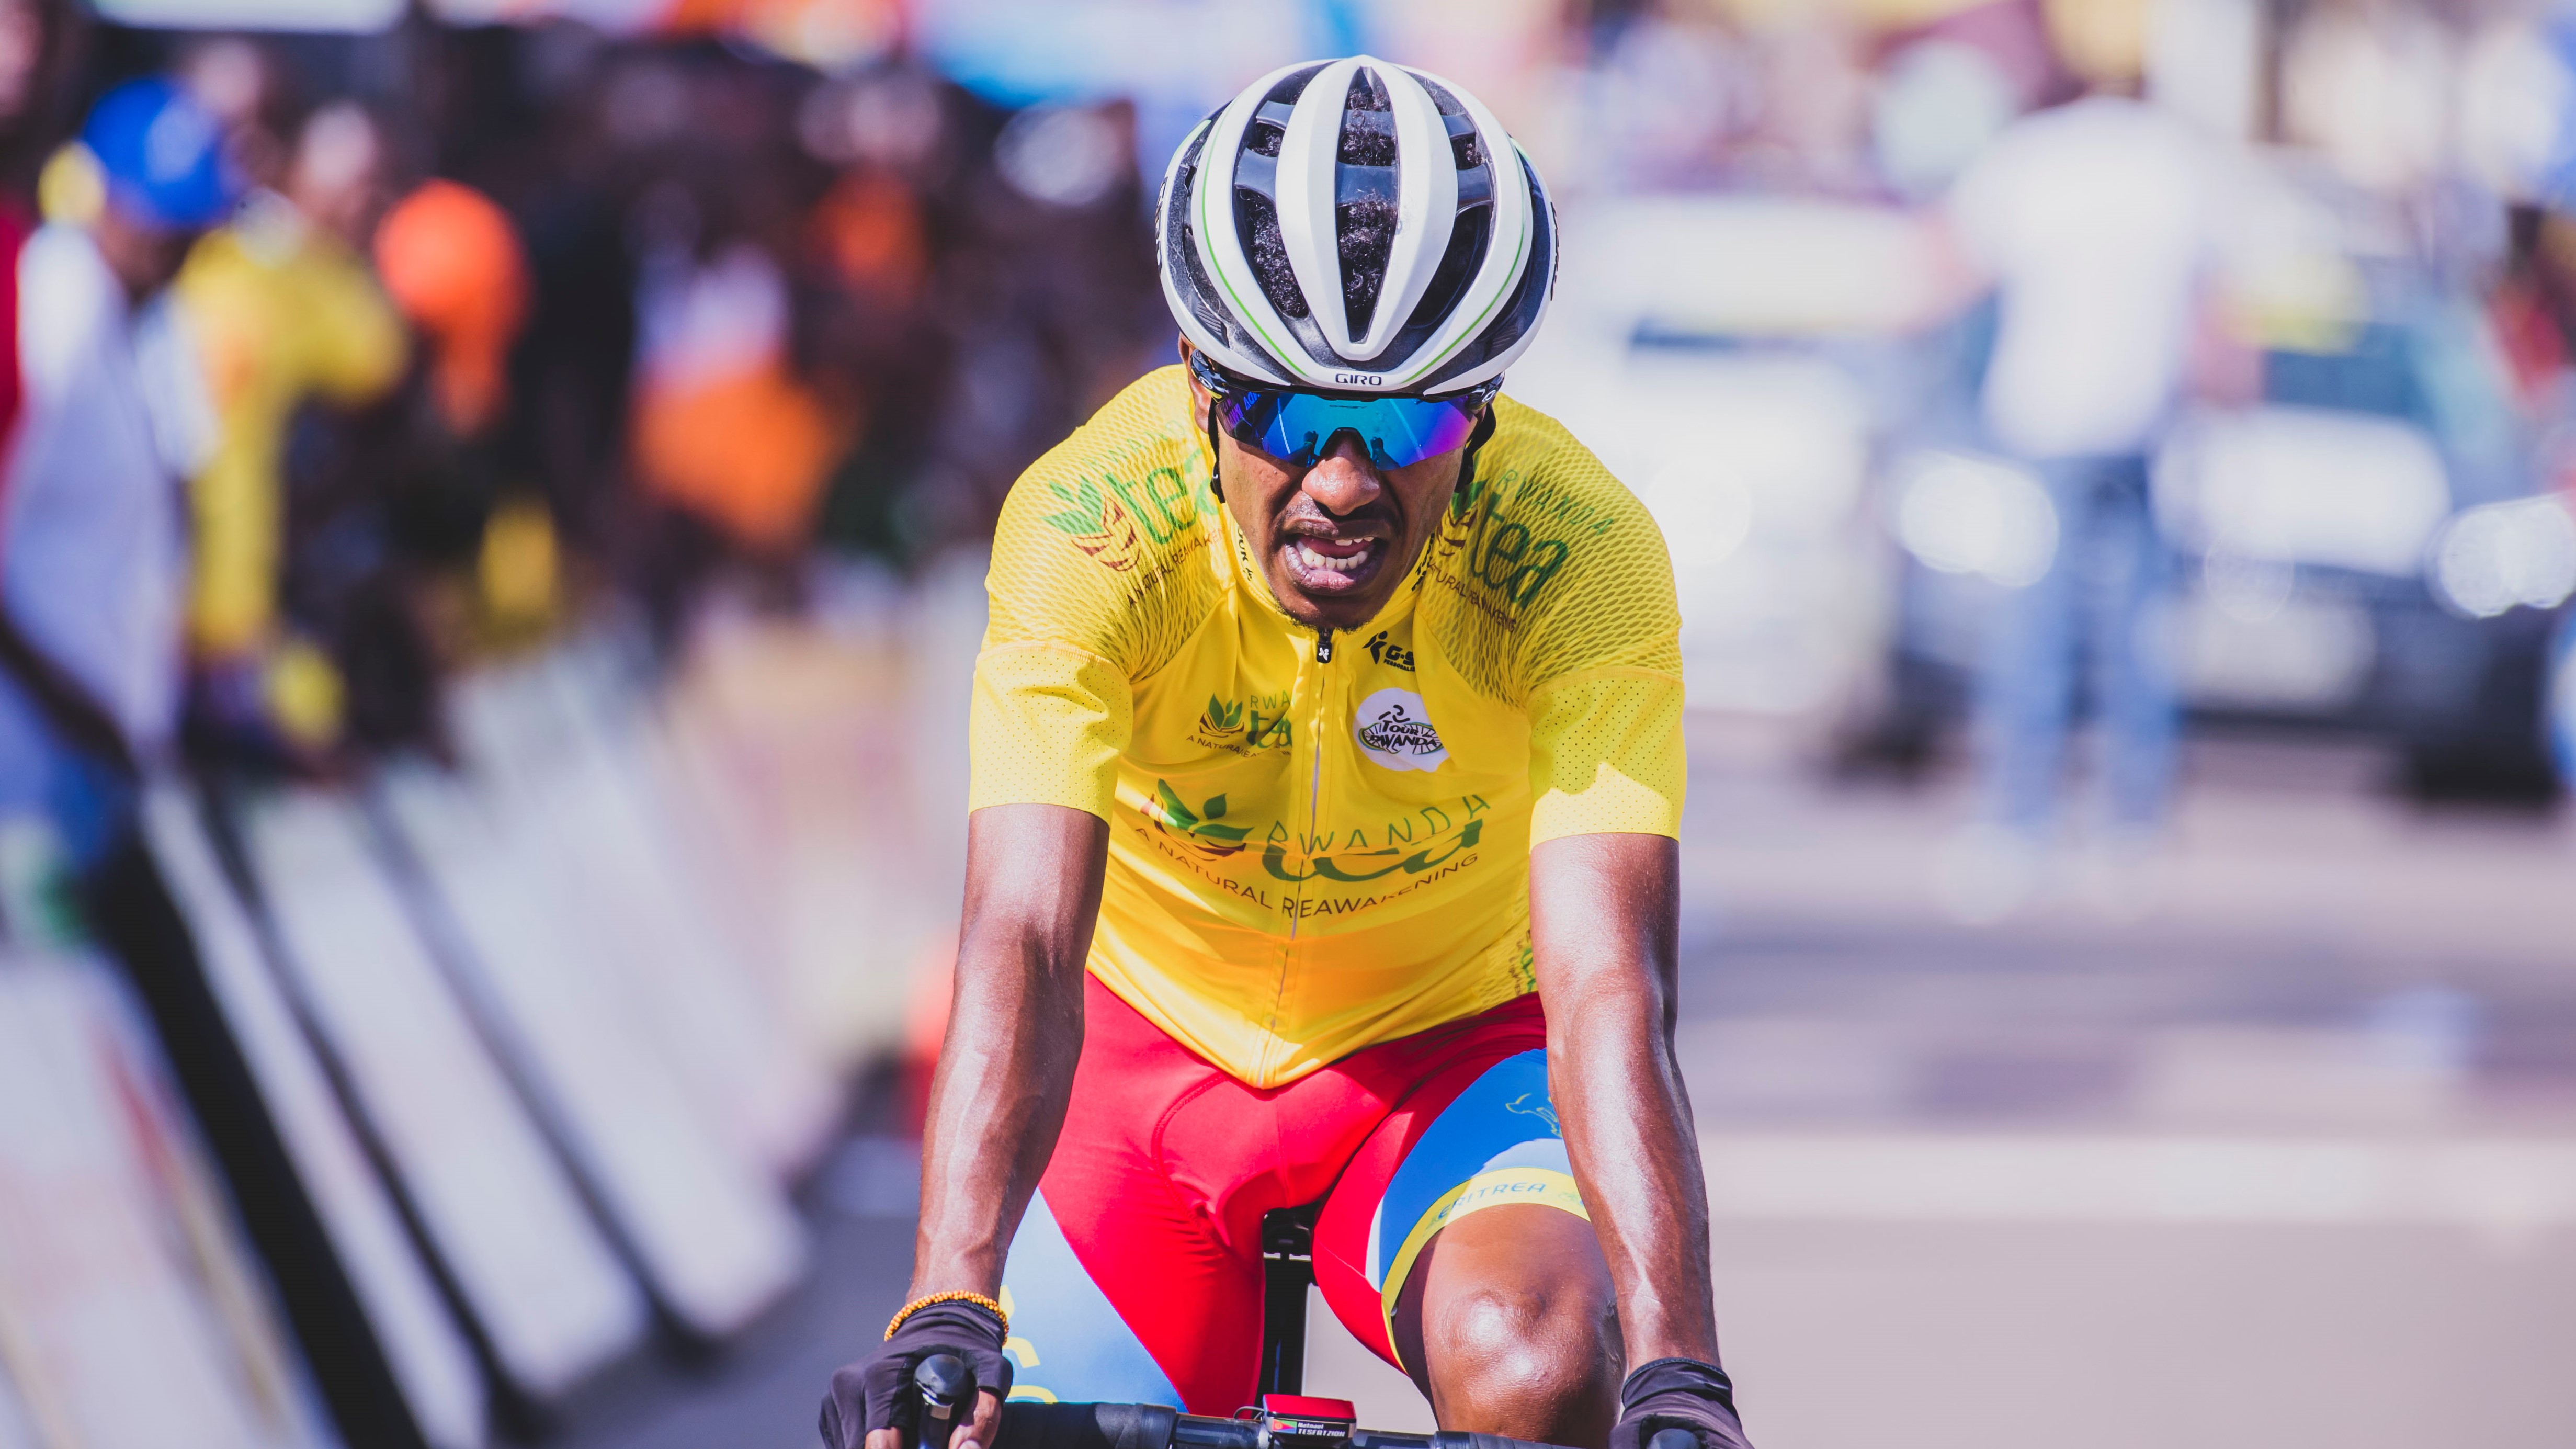 Natnael Tesfazion, 20, was in the Yellow Jersey for four days - since Stage 4 - en route to his victory as the third Eritrean and second in a row to win the Tour du Rwanda. Photo: 